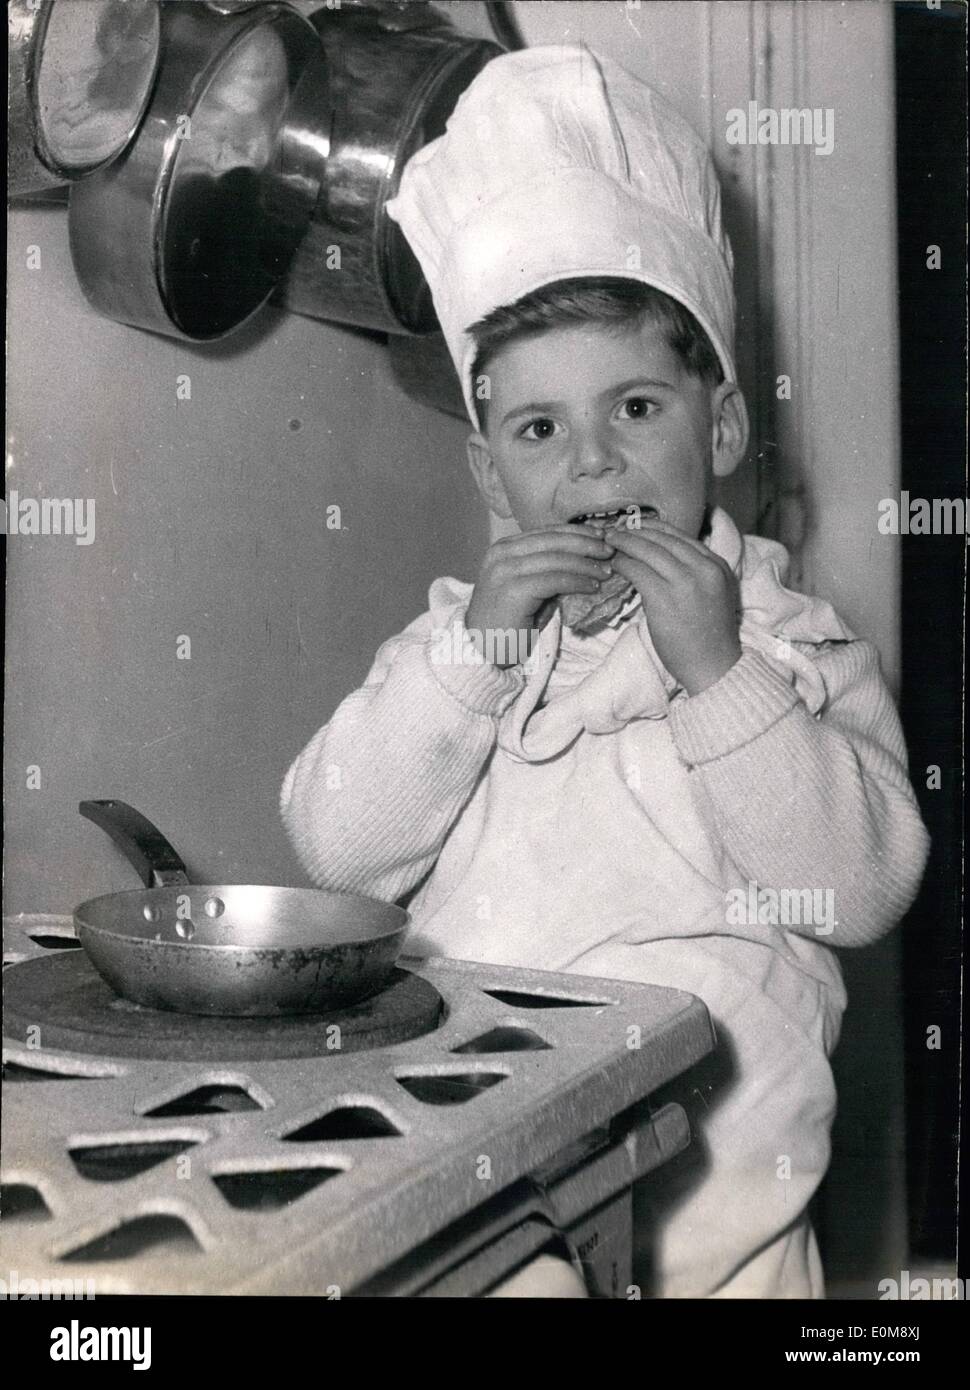 Jan. 01, 1954 - Ready For Candles: After Watching Mammy Doing The Pancakes, Little Francois Has A Try. White Apron And Chef's Bonnet Make Him Look Like A Real Cook. Stock Photo